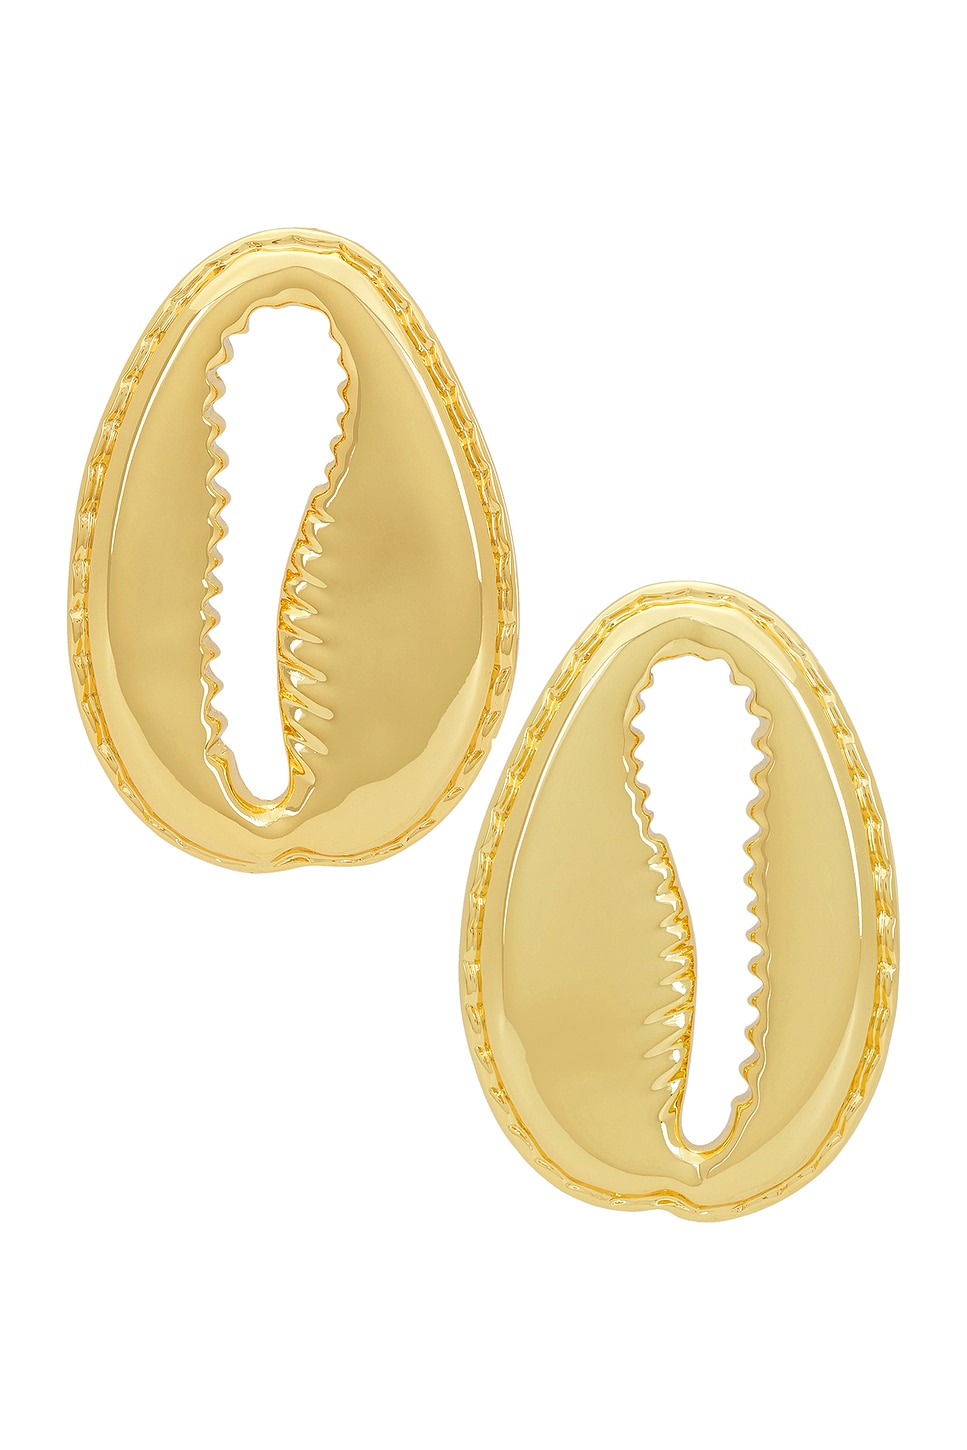 Image 1 of Eliou Concha Earrings in Gold Plated